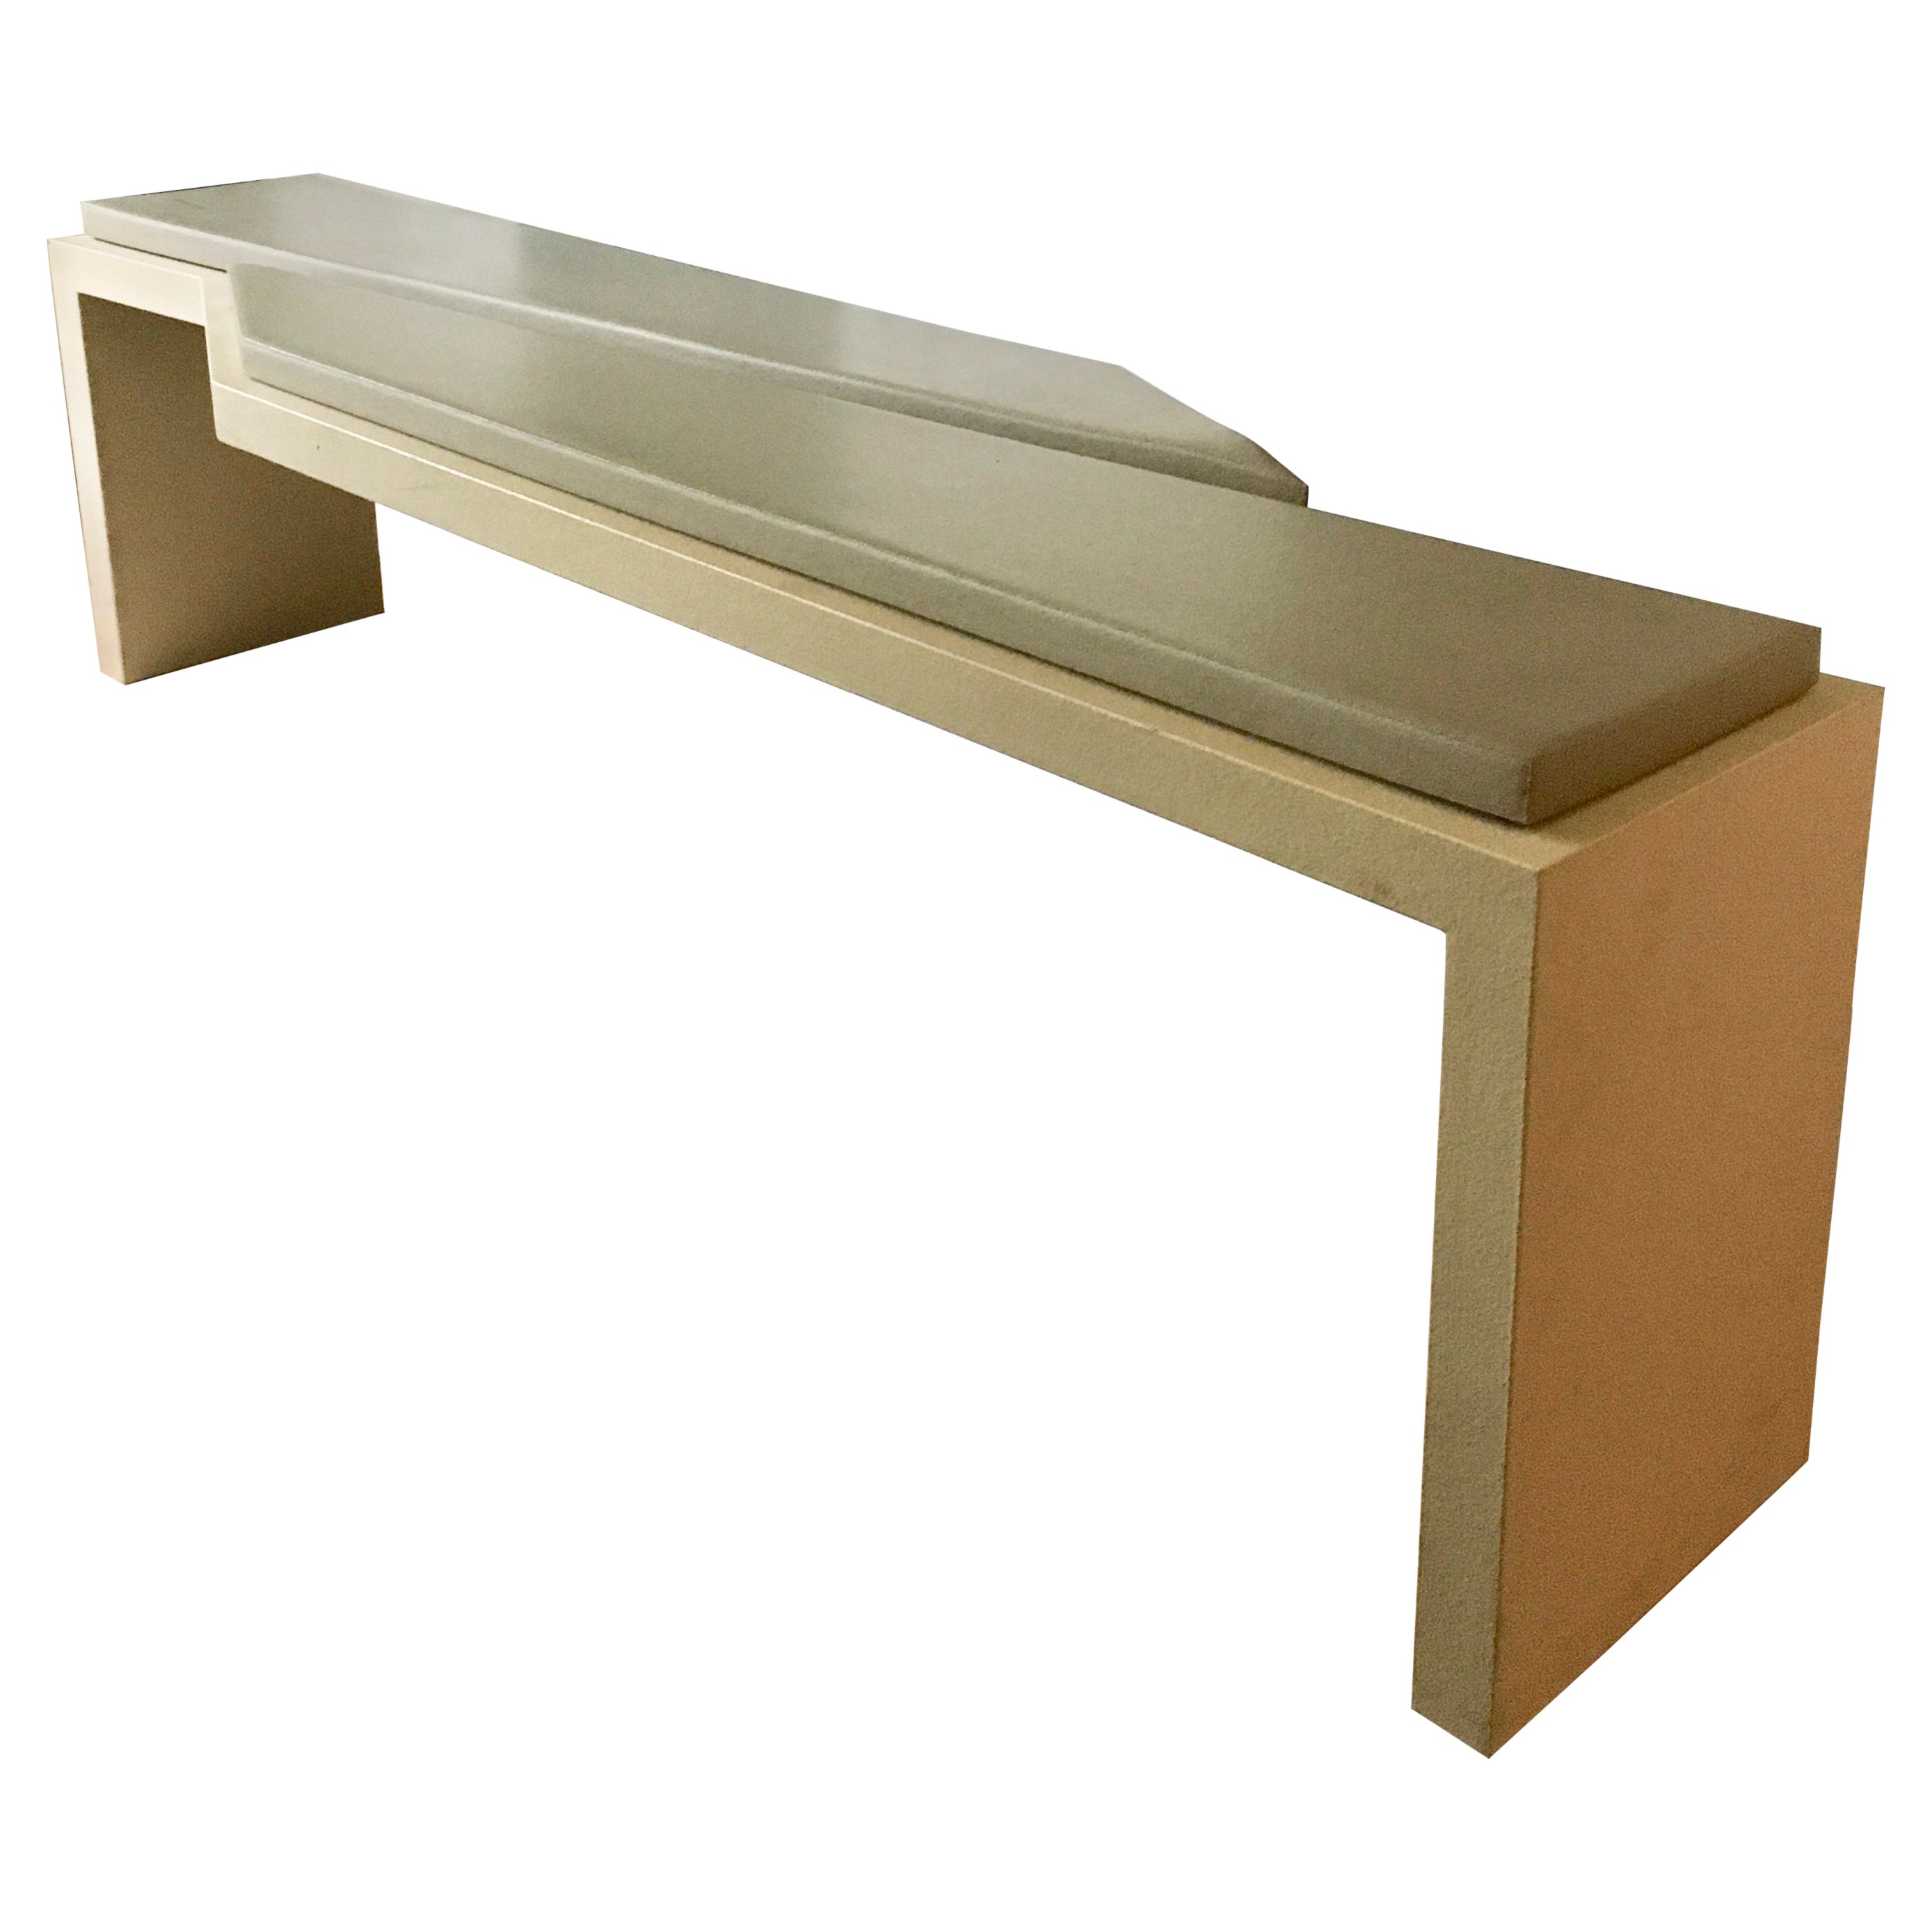 Sculptural Geometric Prototype Bench Attributed to  Arne Quinze, Belgium 2000 For Sale